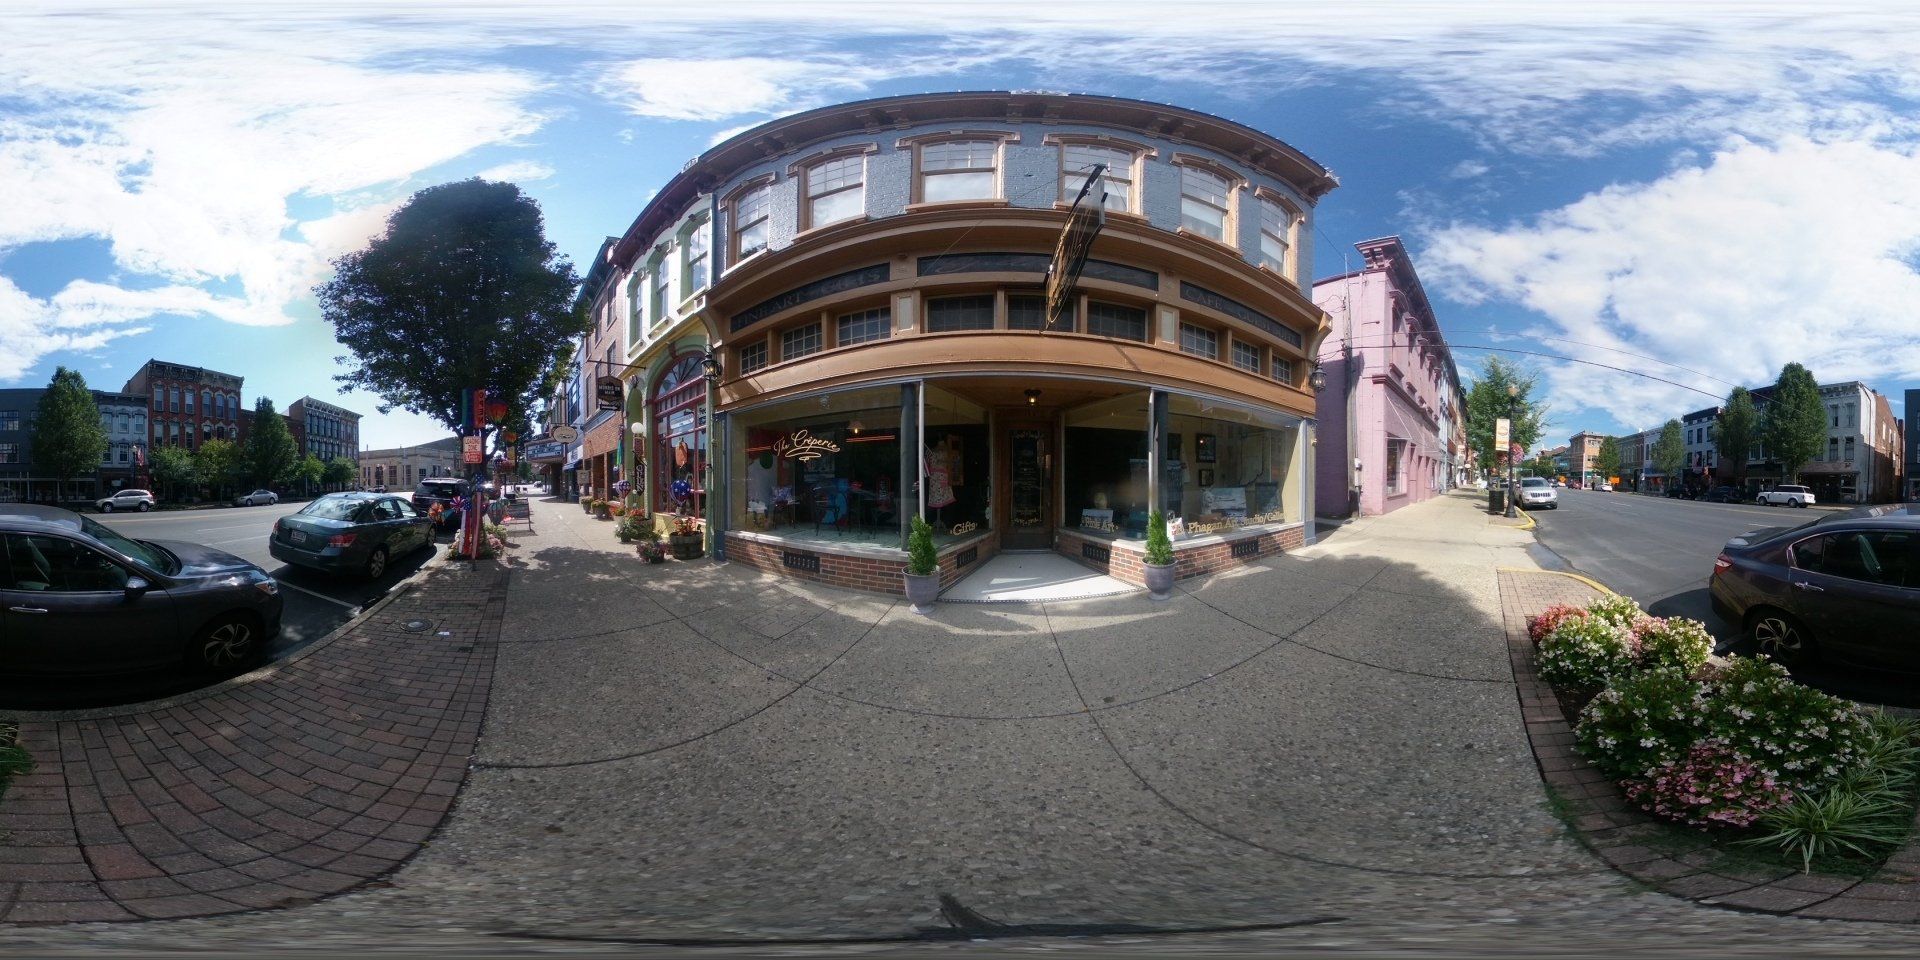 A 360 degree view of a building with cars parked in front of it